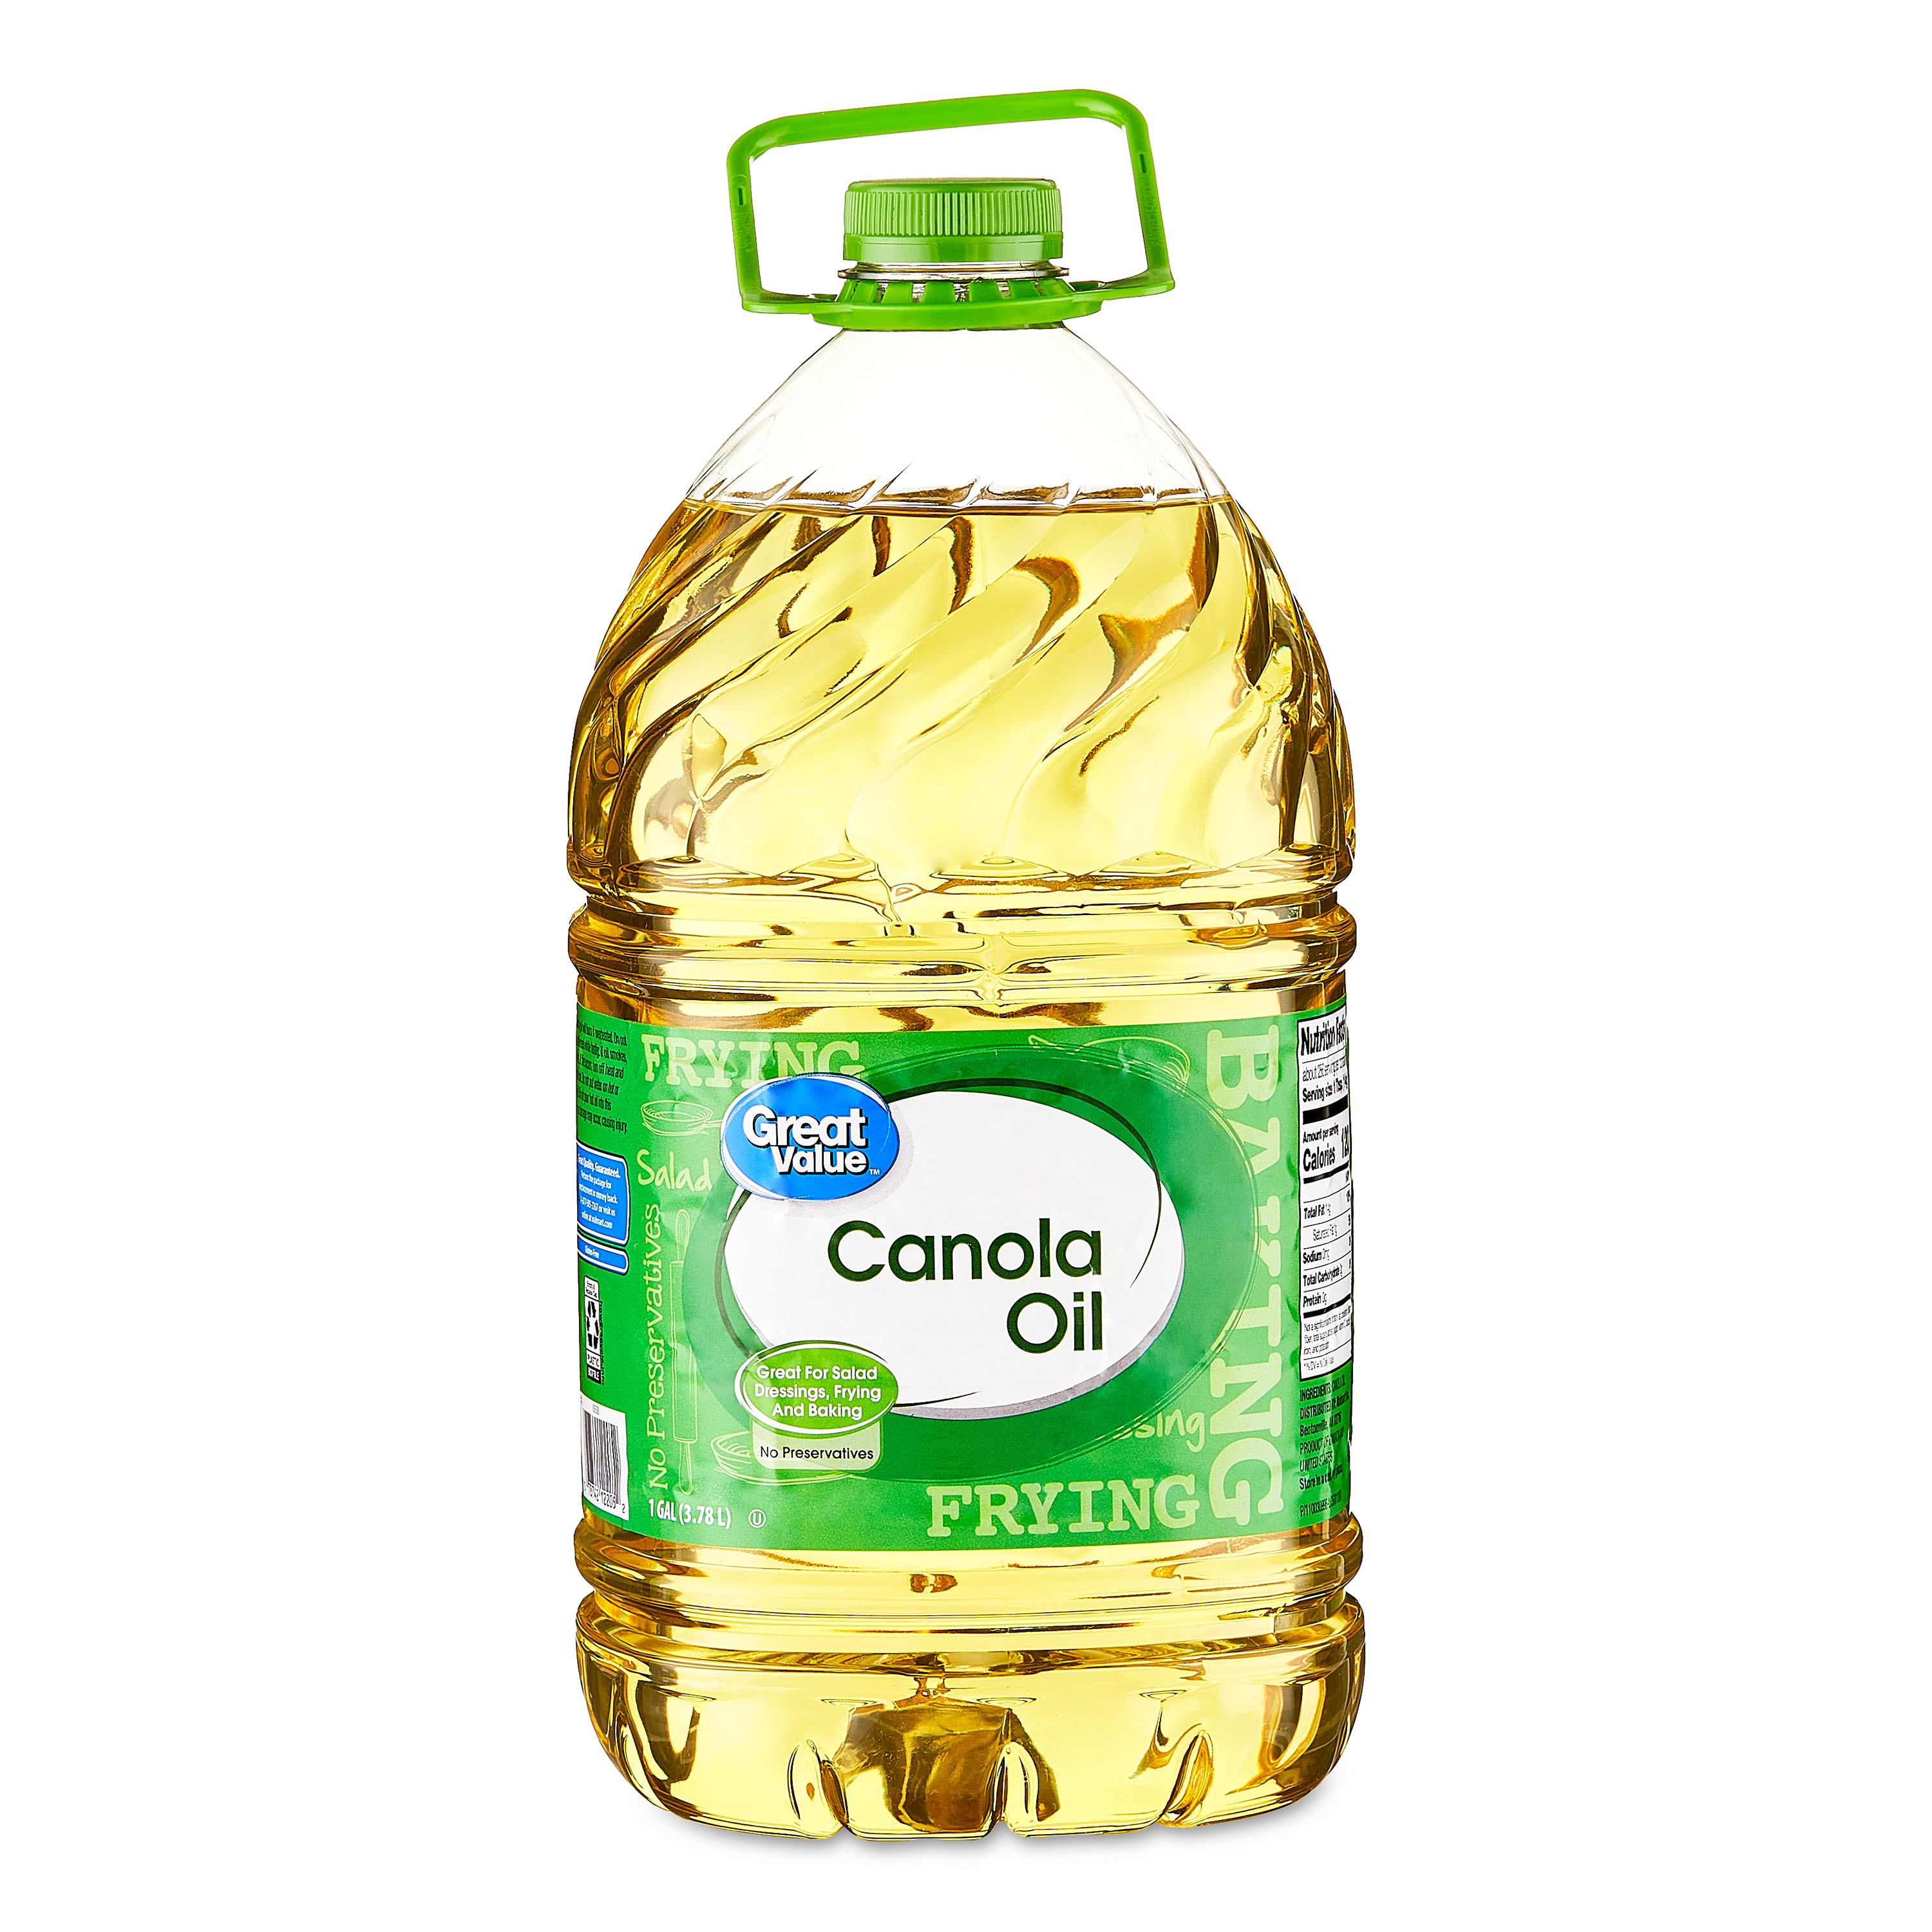 Great Value Canola Oil, 1 gal - image 1 of 7